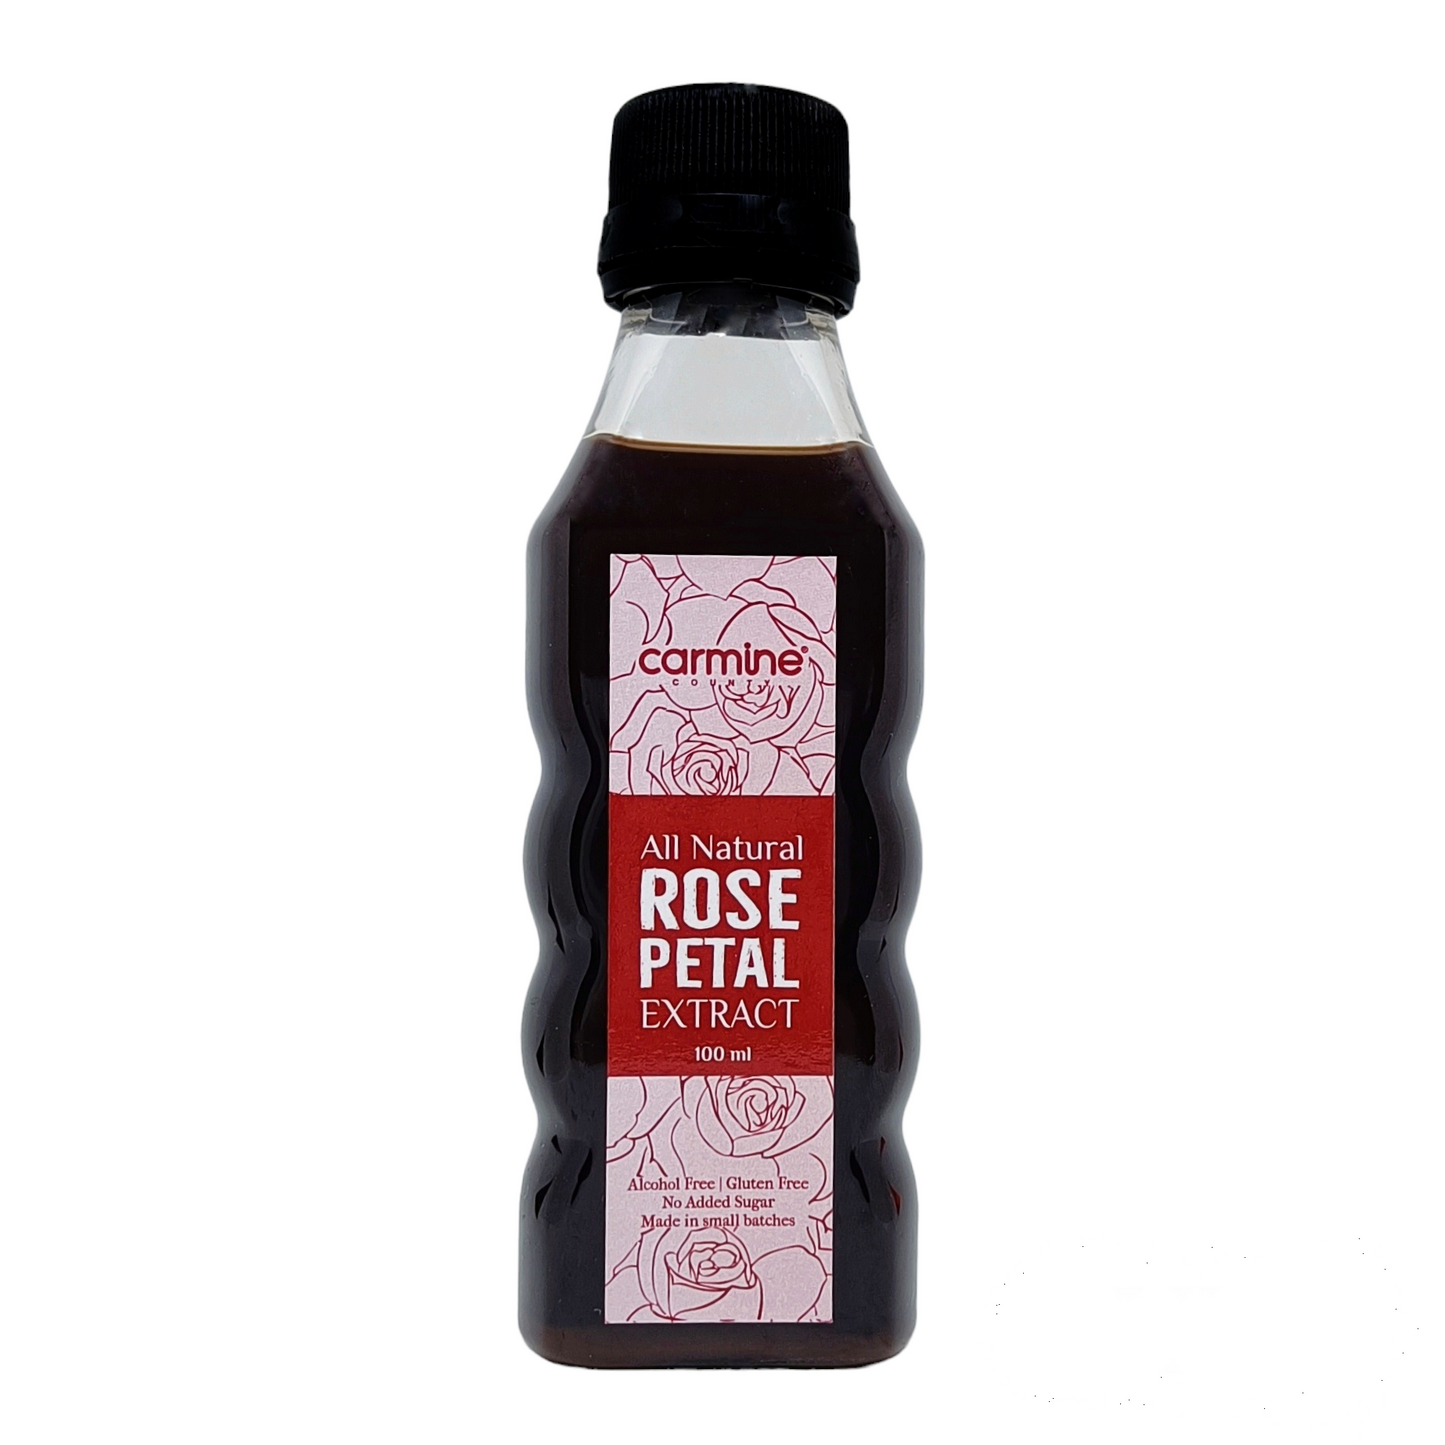 Carmine County All Natural Rose Petal Extract 100 ml